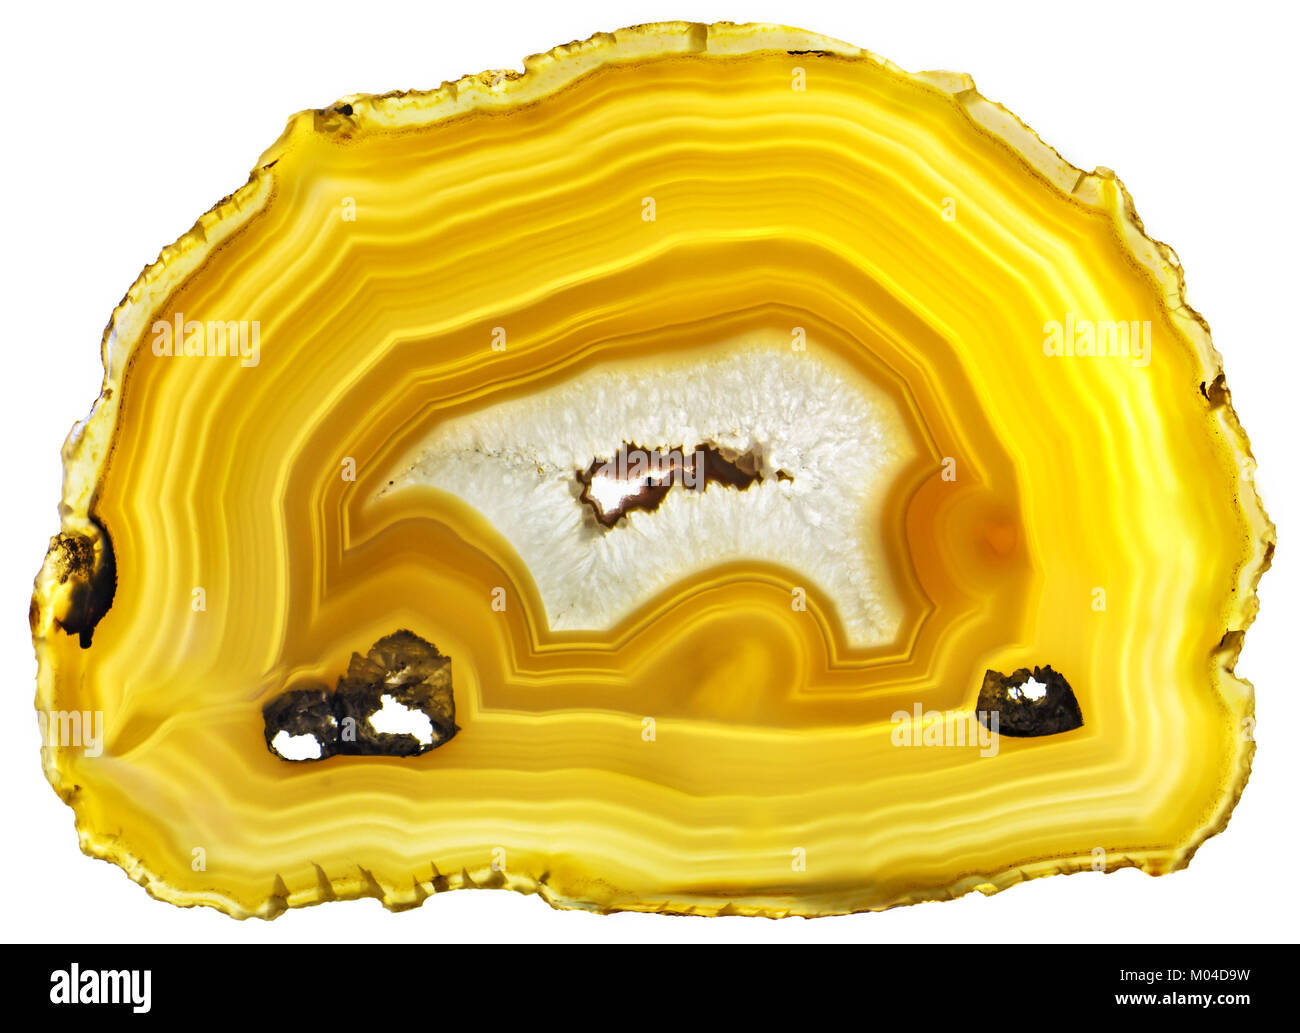 Agate Crystal cross section isolated on white background Stock Photo ...